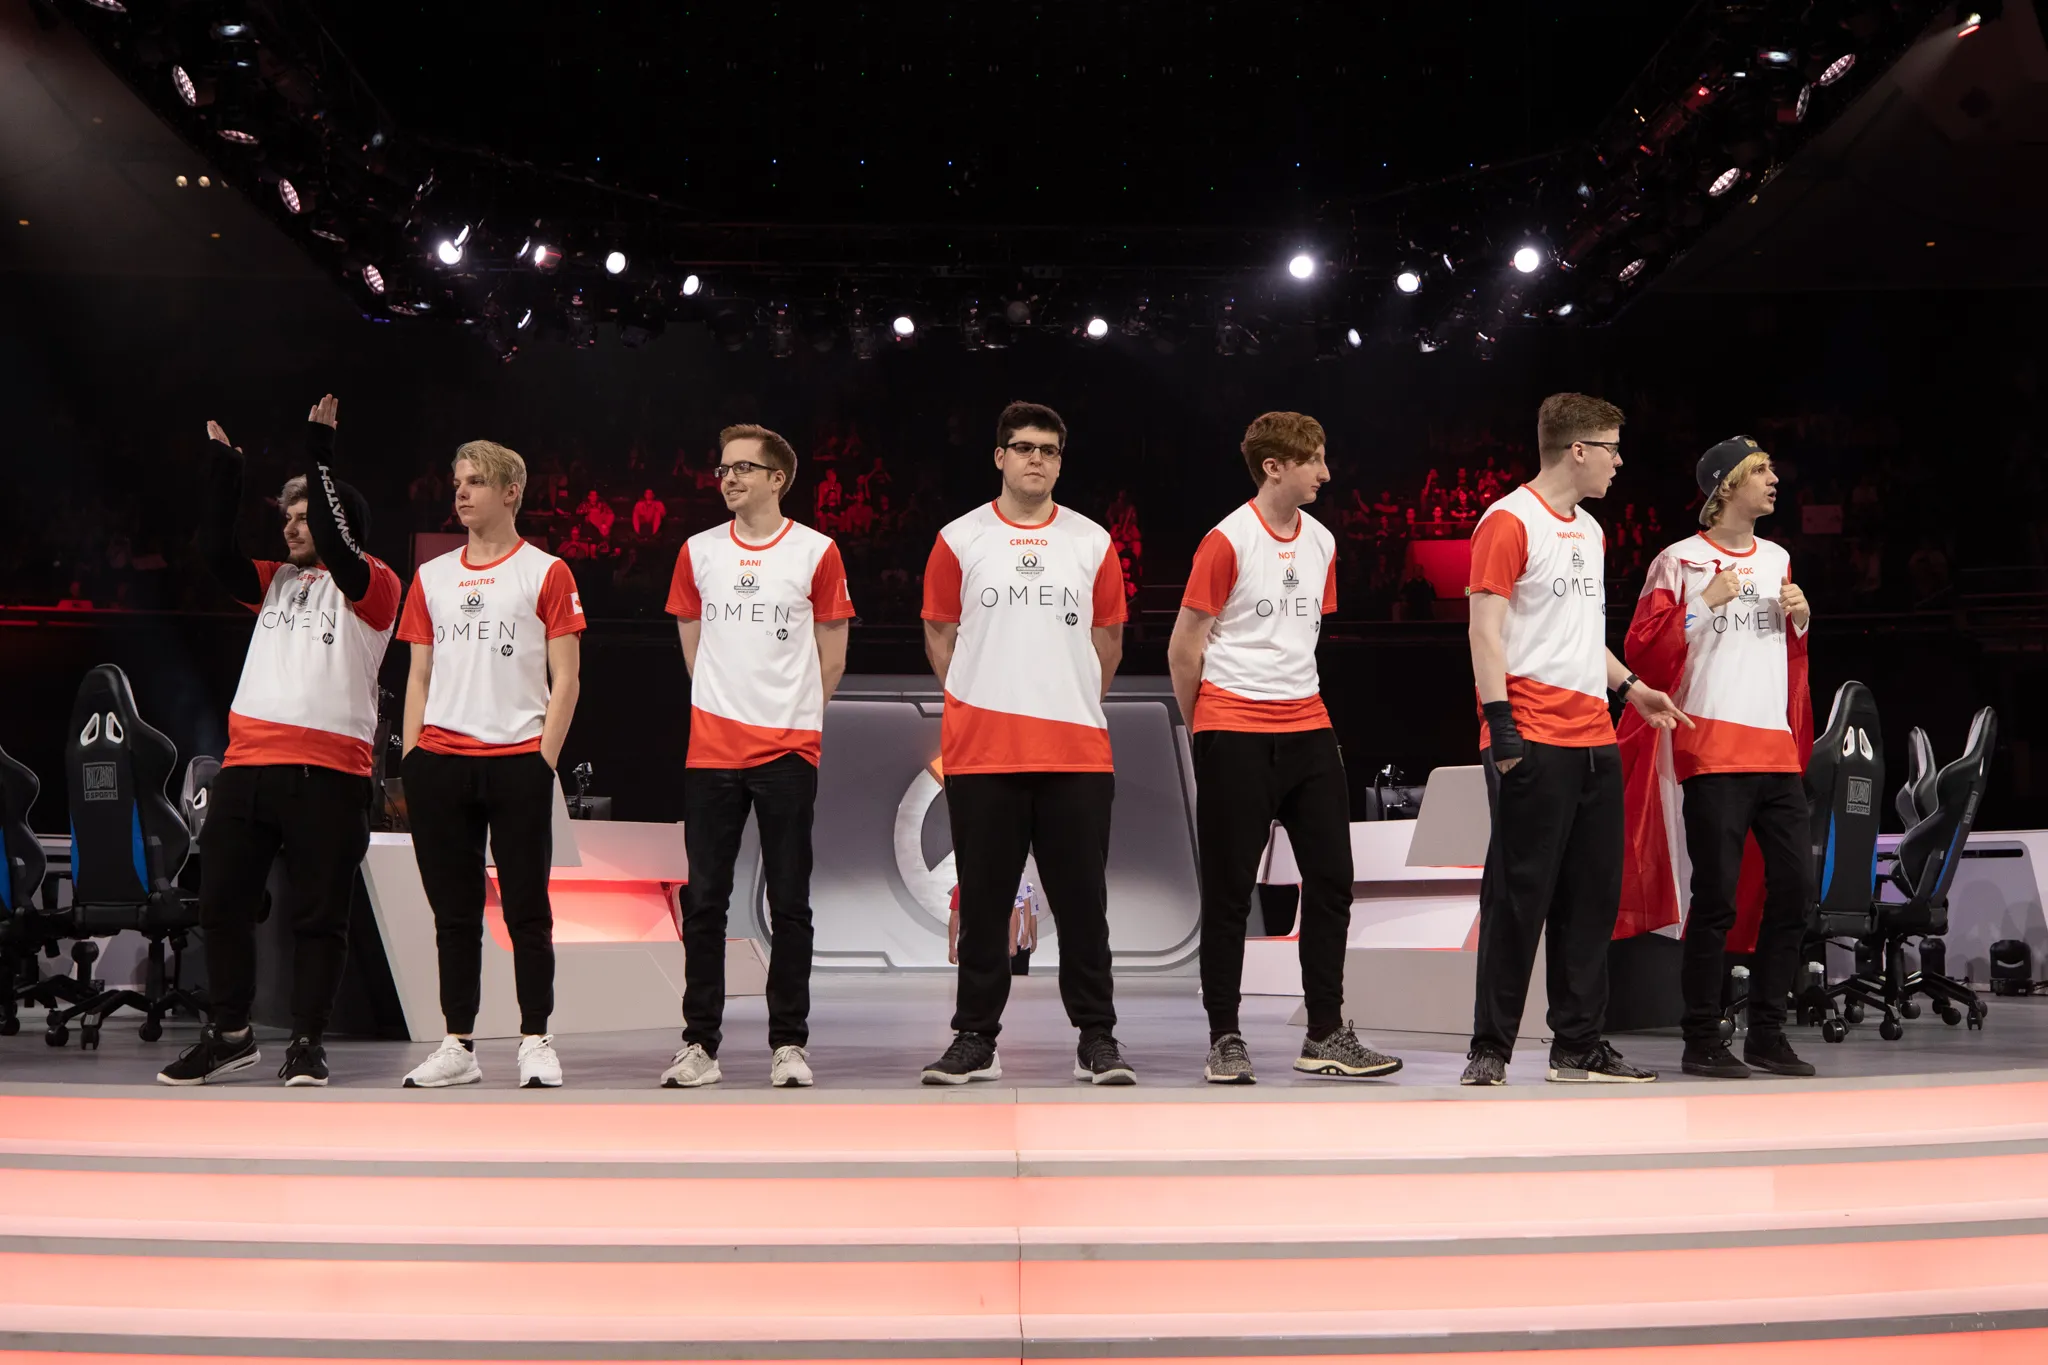 Team Canada at the 2019 Overwatch World Cup.